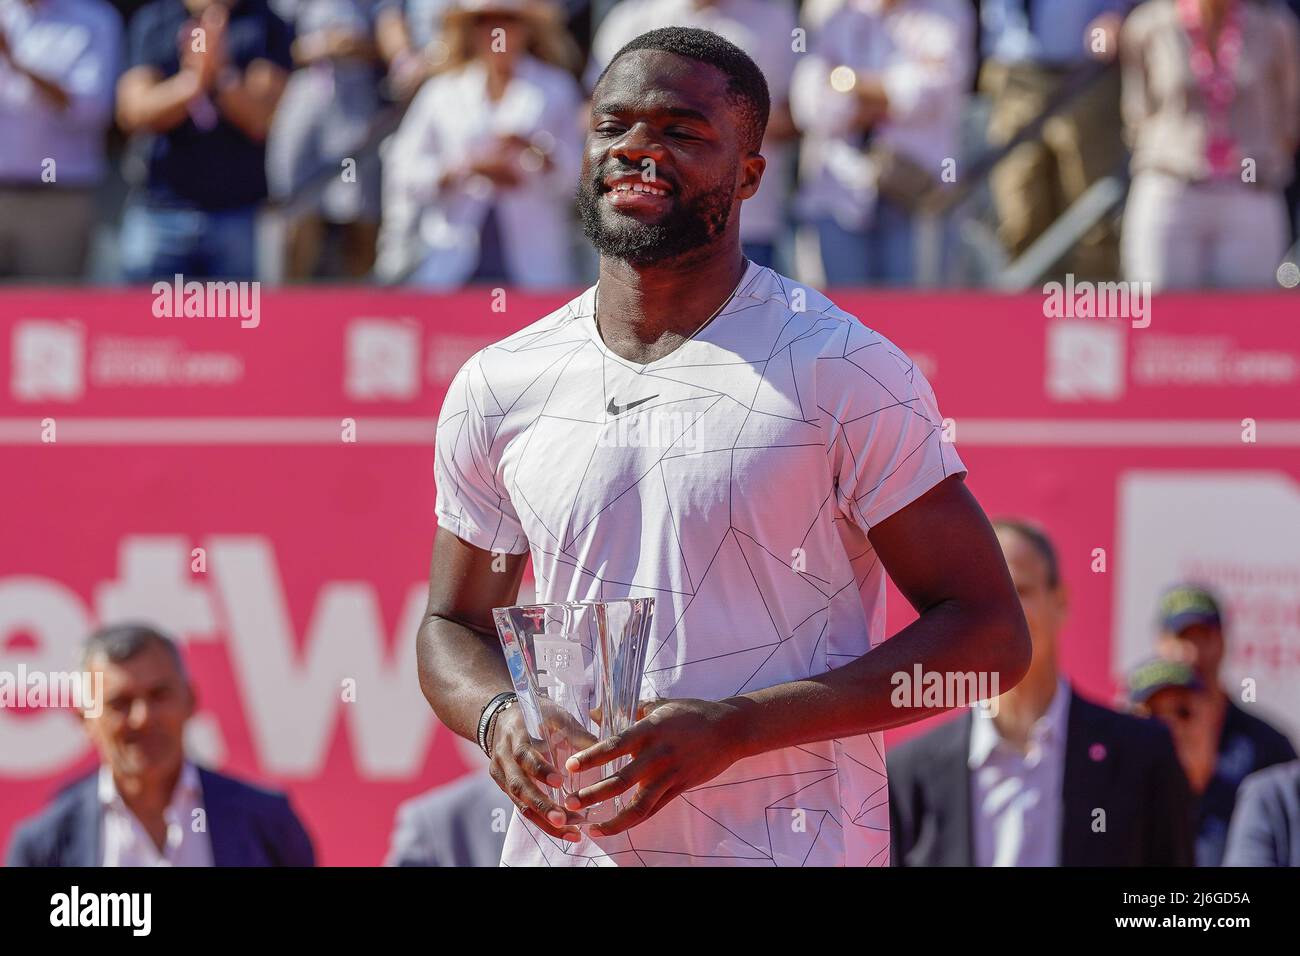 Frances Tiafoe from United States of America holds a trophy after Millennium Estoril Open Final ATP 250 tennis tournament at the Clube de Tenis do Estoril.Final score Frances Tiafoe 02 Sebastian Baez